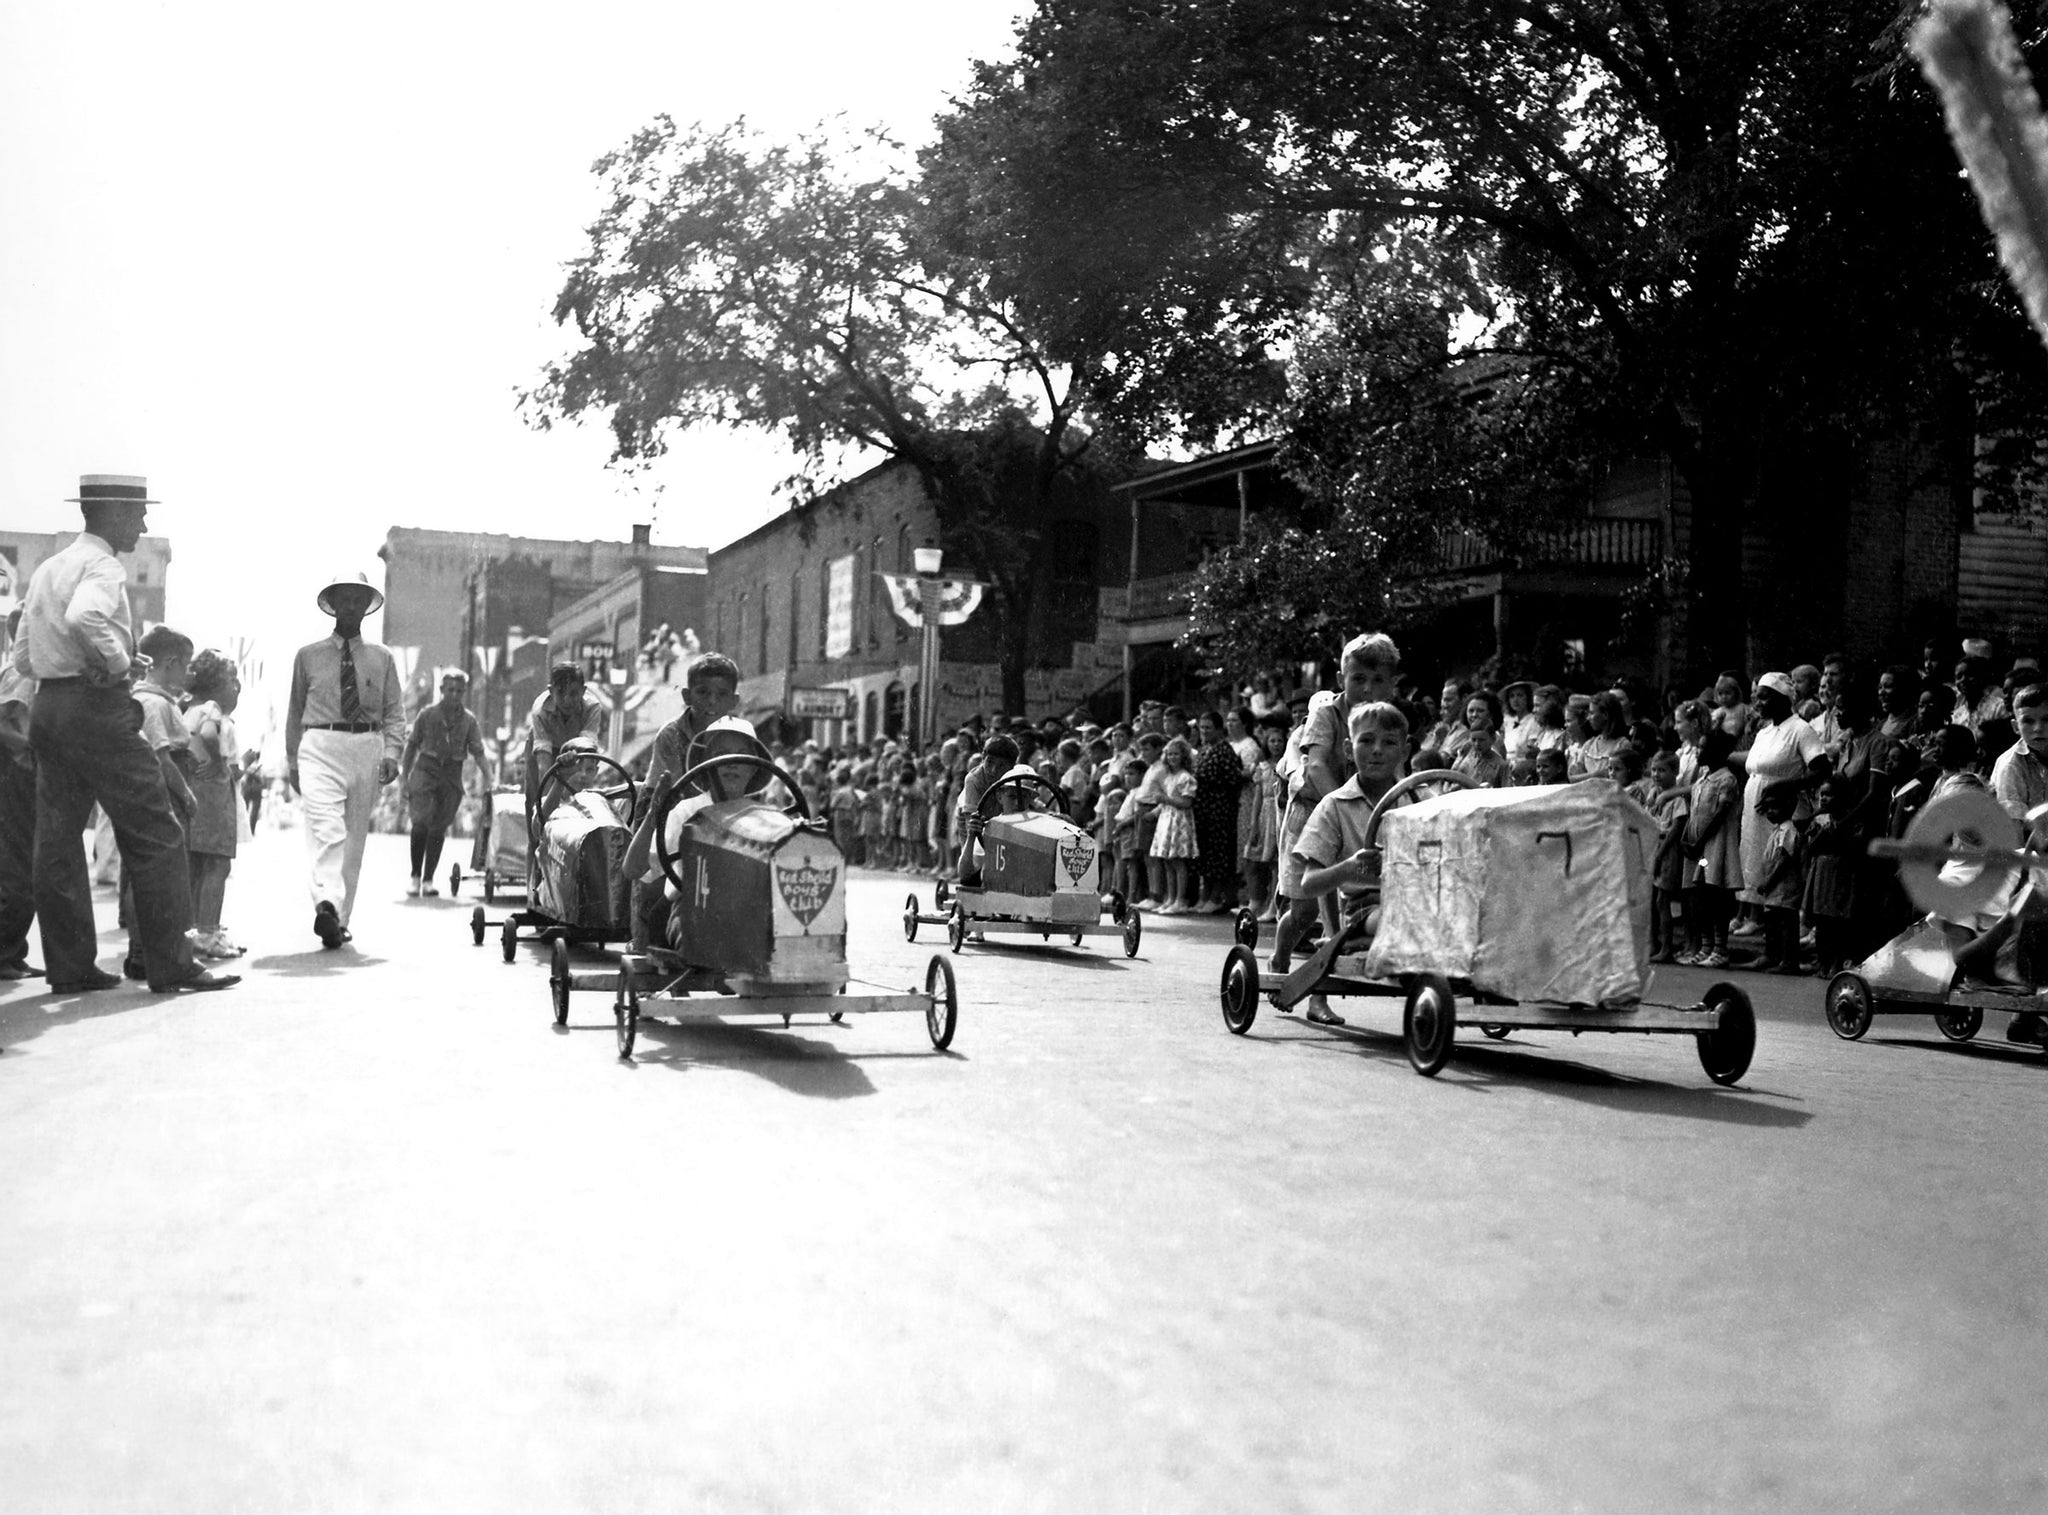 Soap box derby racing at the Gastonia Cotton Festival, 1939. -- Millican Pictorial History Museum